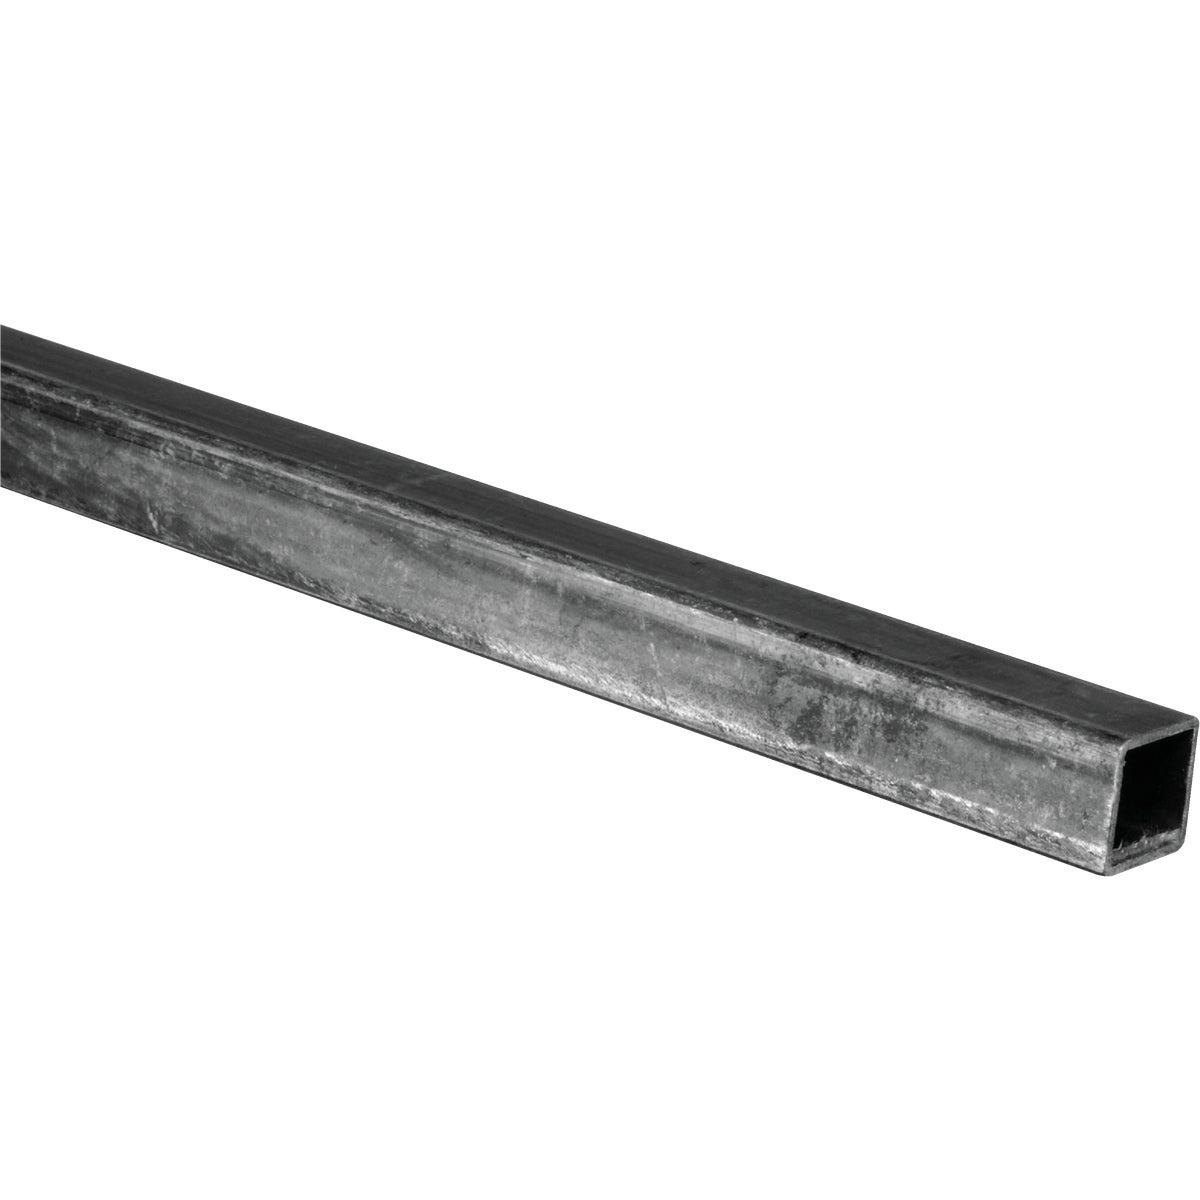 Item 734940, Weldable square tubes are ideal for fence repairs, key stock, handles and 